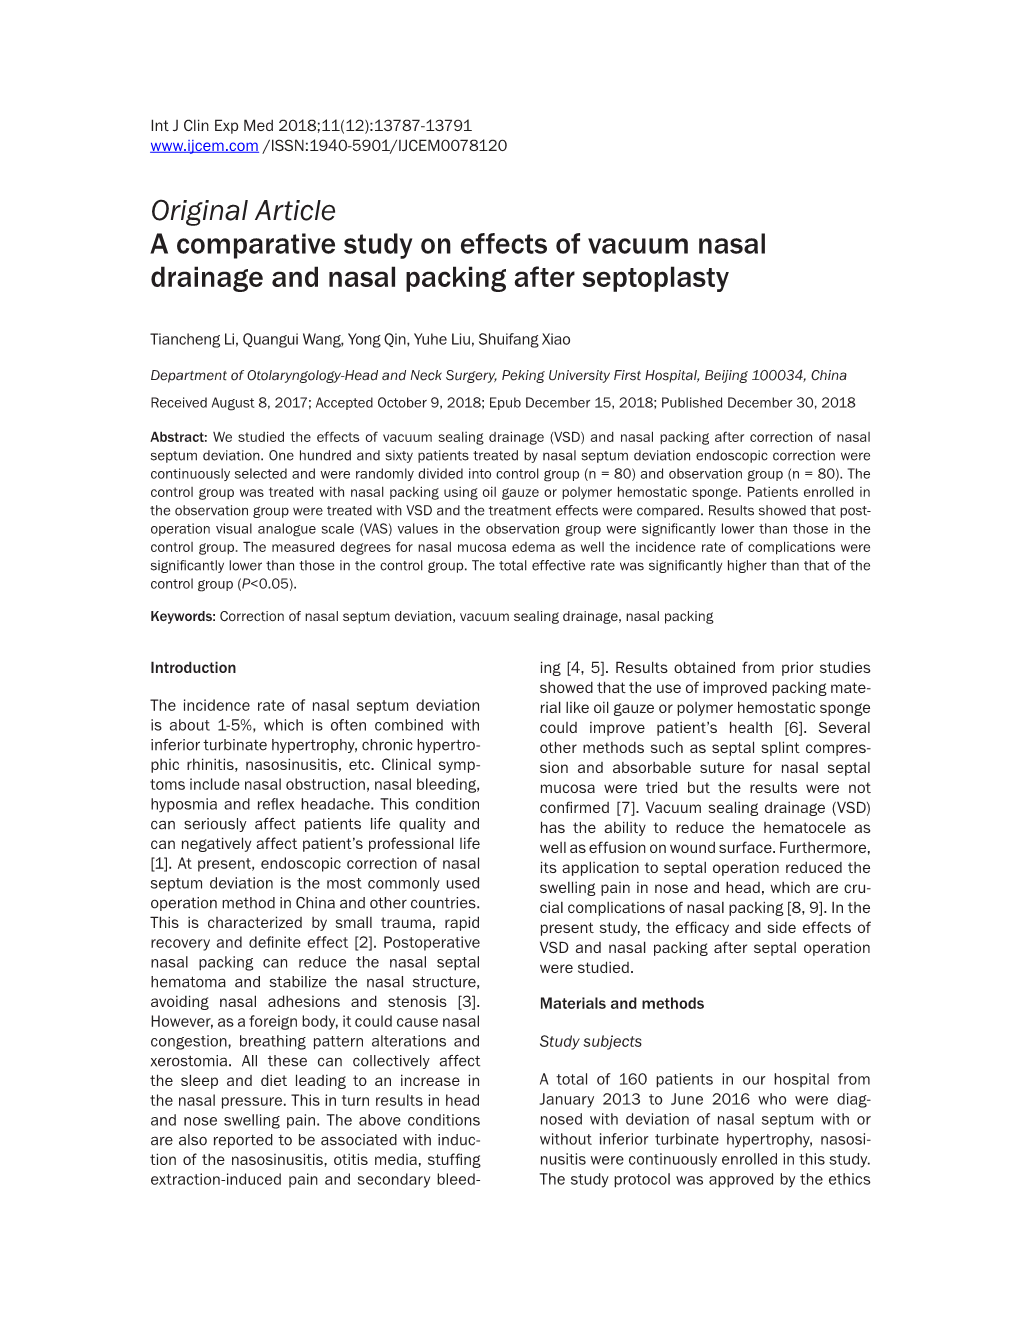 Original Article a Comparative Study on Effects of Vacuum Nasal Drainage and Nasal Packing After Septoplasty